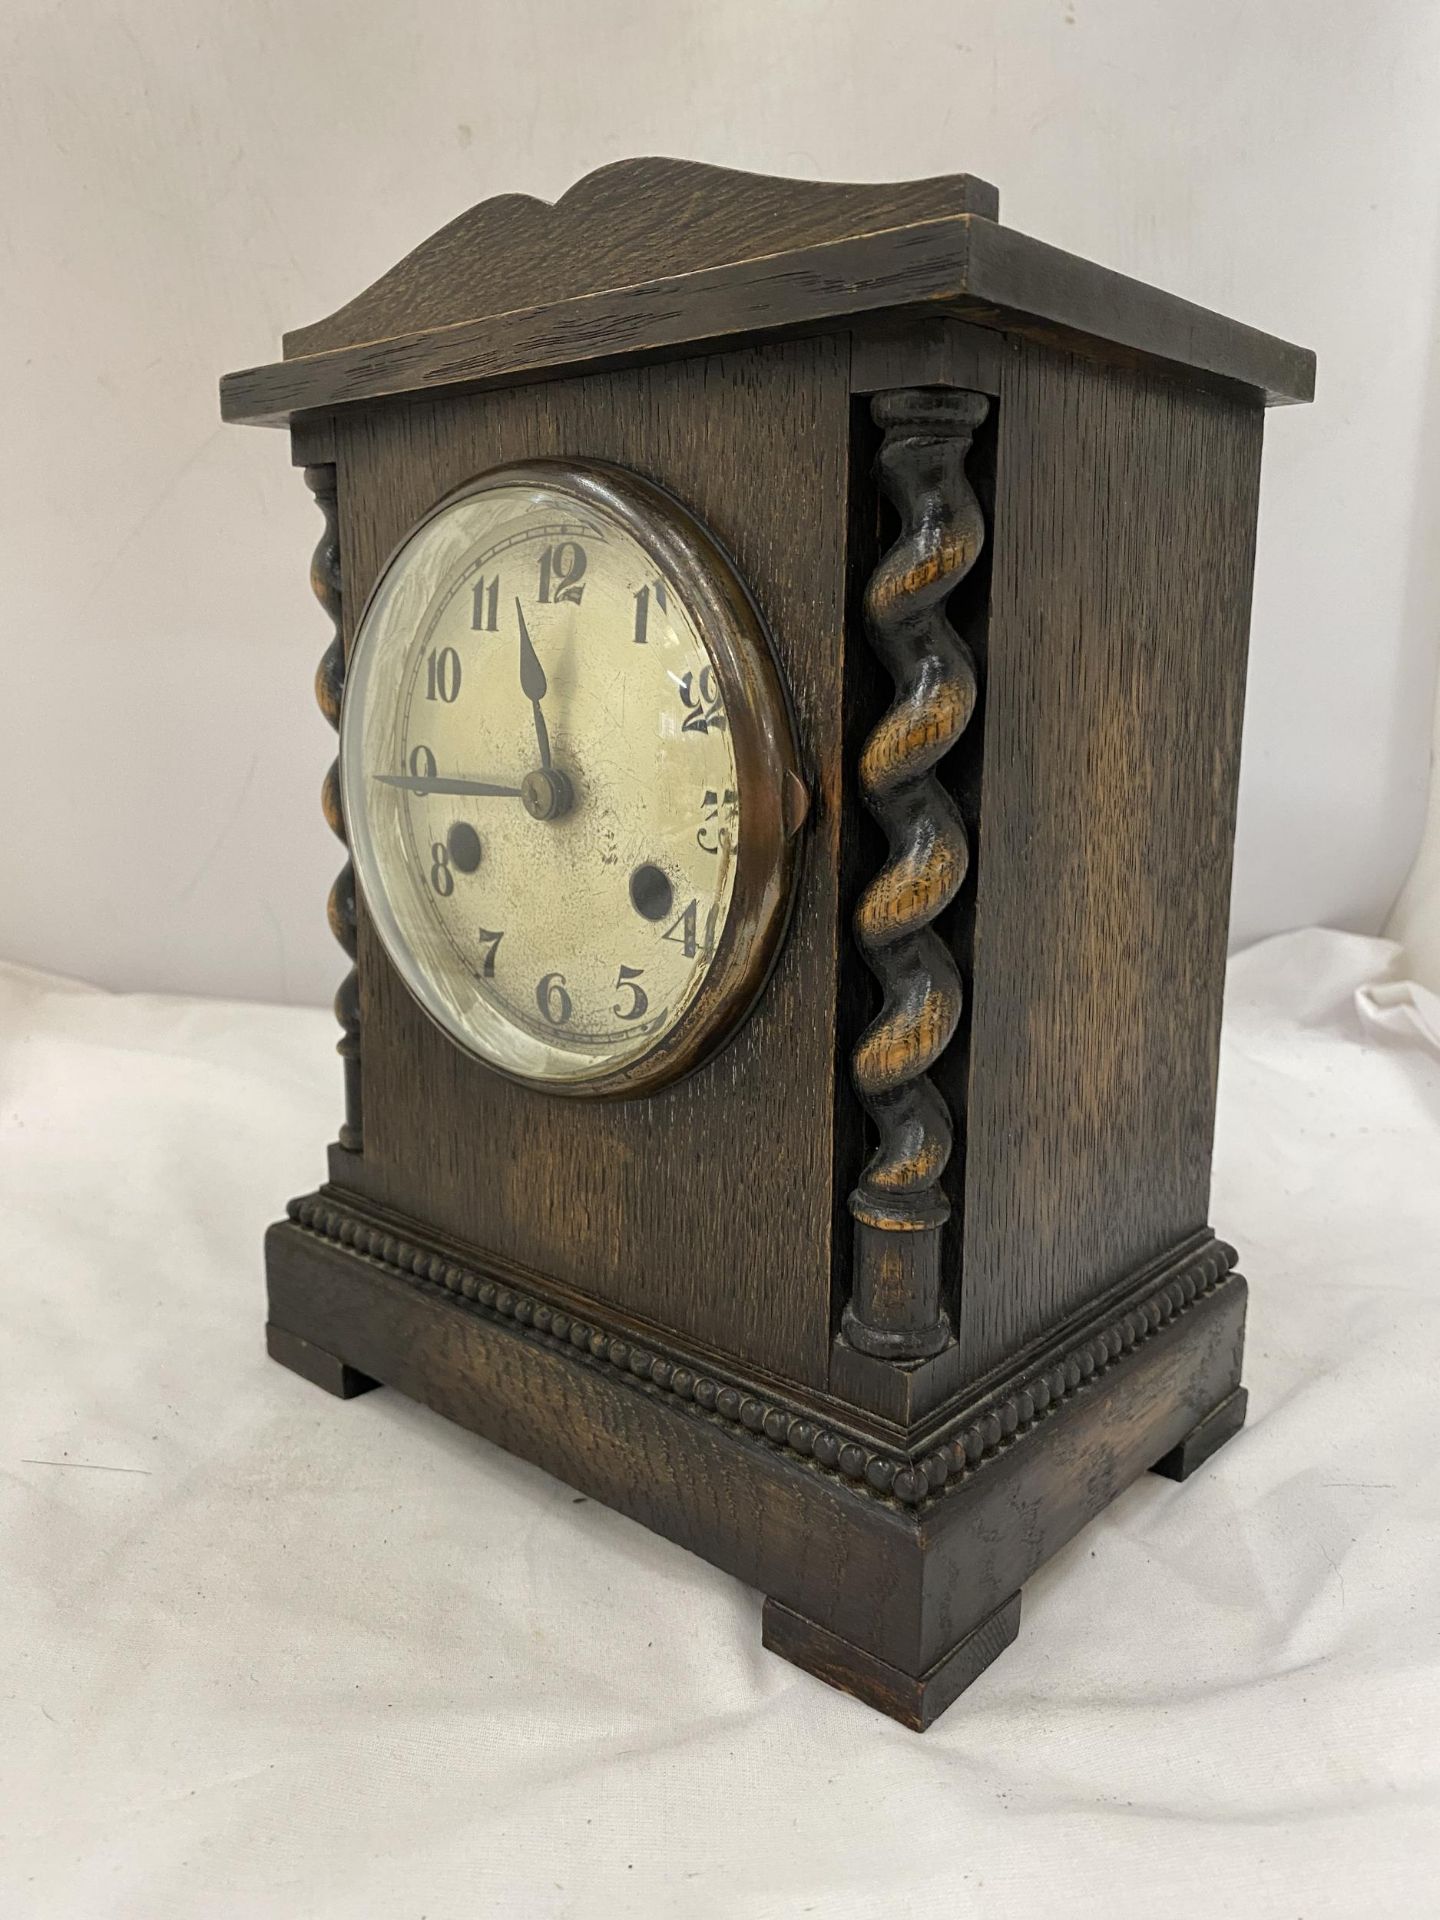 A WOODEN MANTLE CLOCK WITH BARLEY TWIST DESIGN - Image 4 of 7